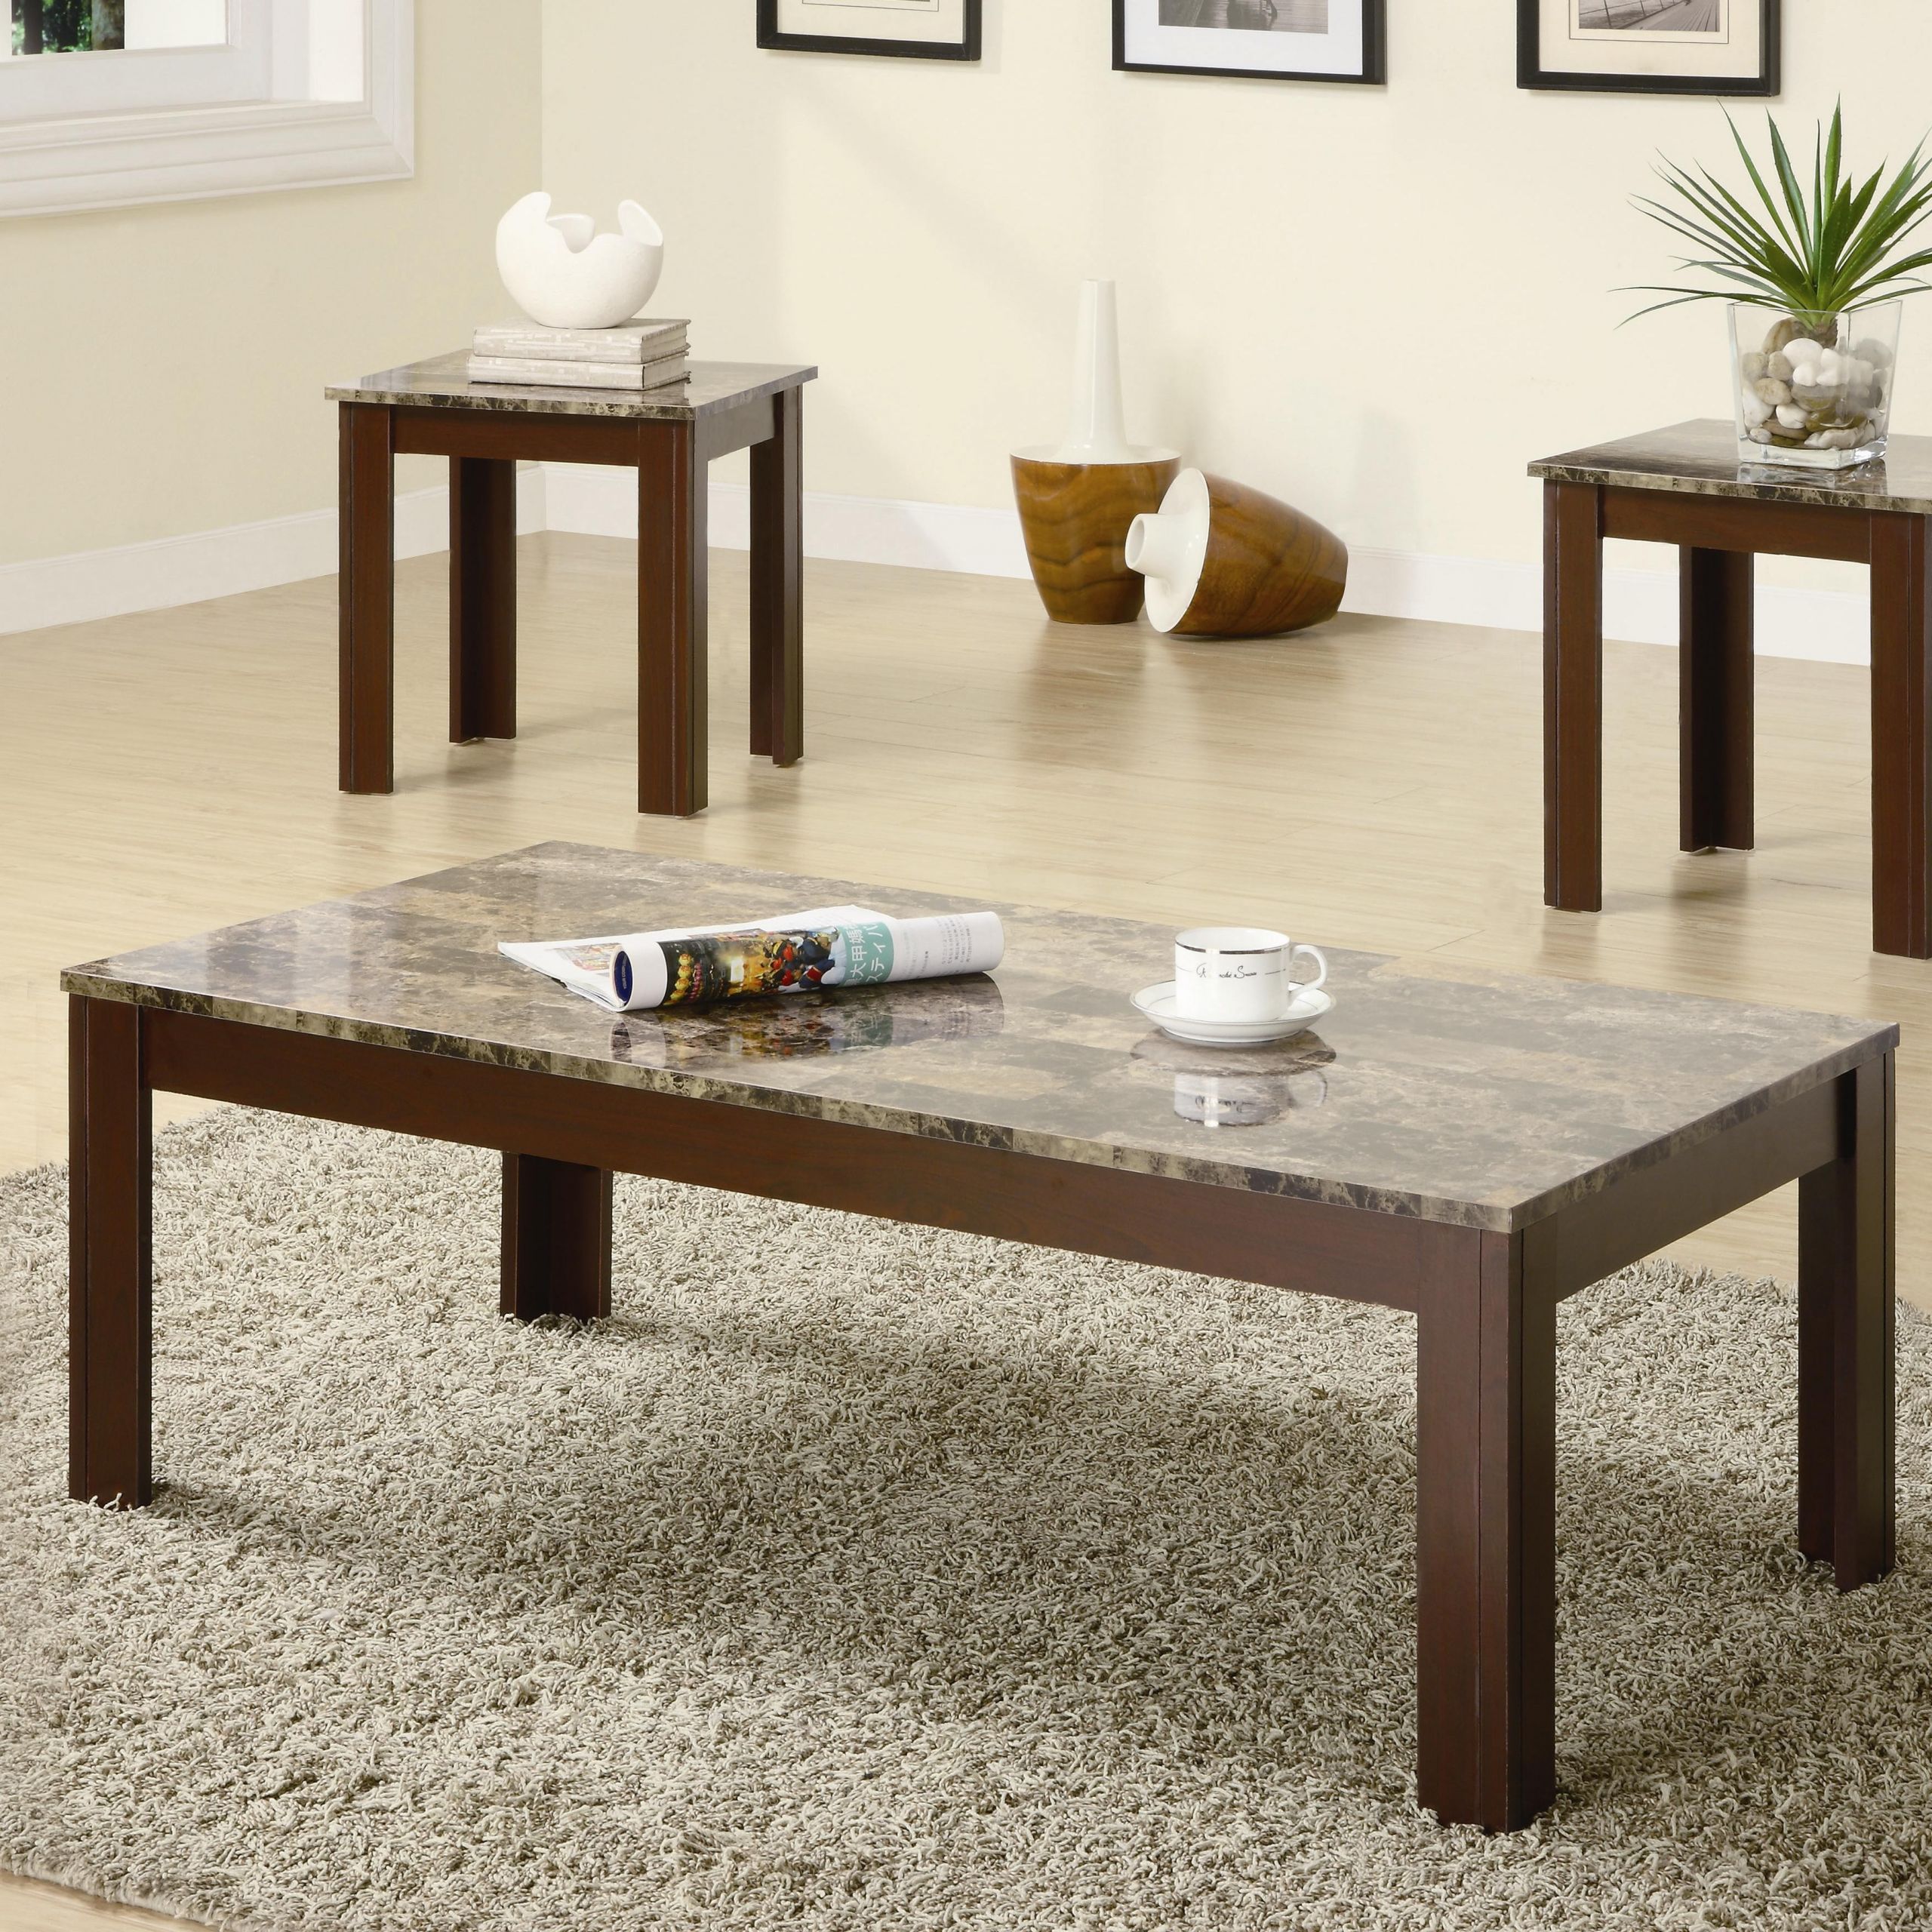 Living Room End Table Sets
 3 Piece Occasional Table Sets Contemporary Cocktail and